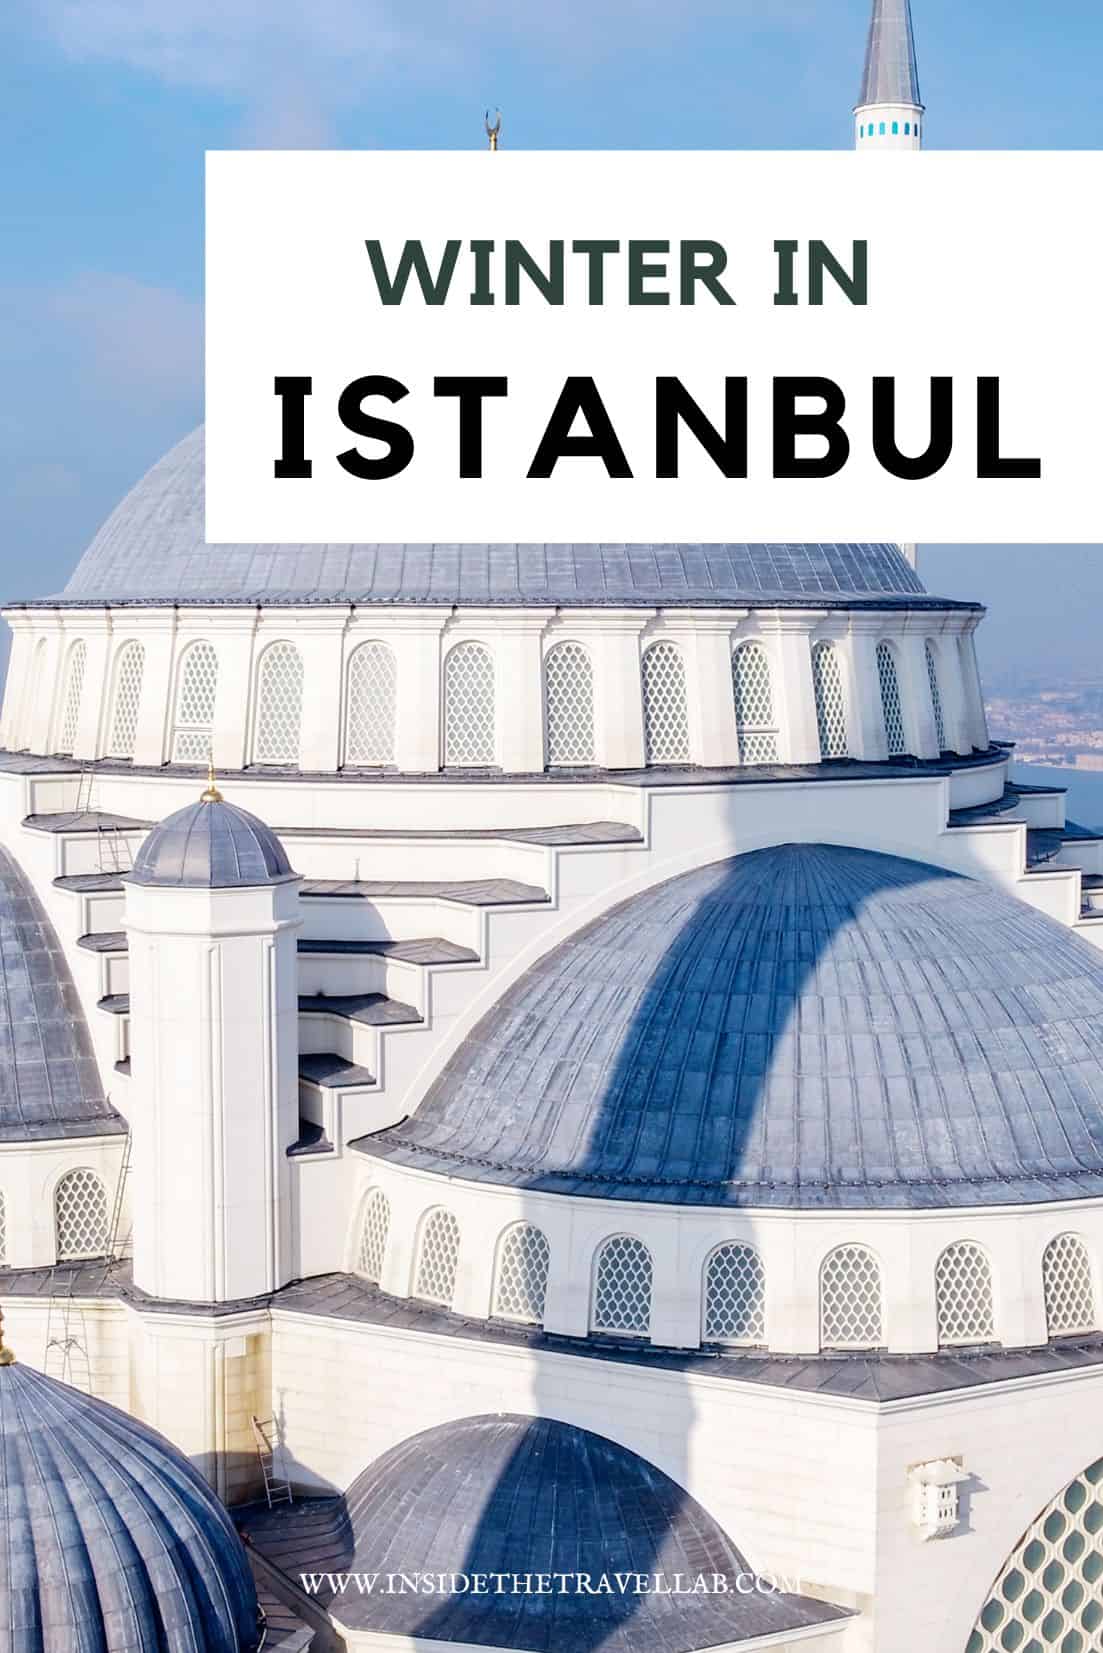 Travel guide to winter in Istanbul cover image of city skyline